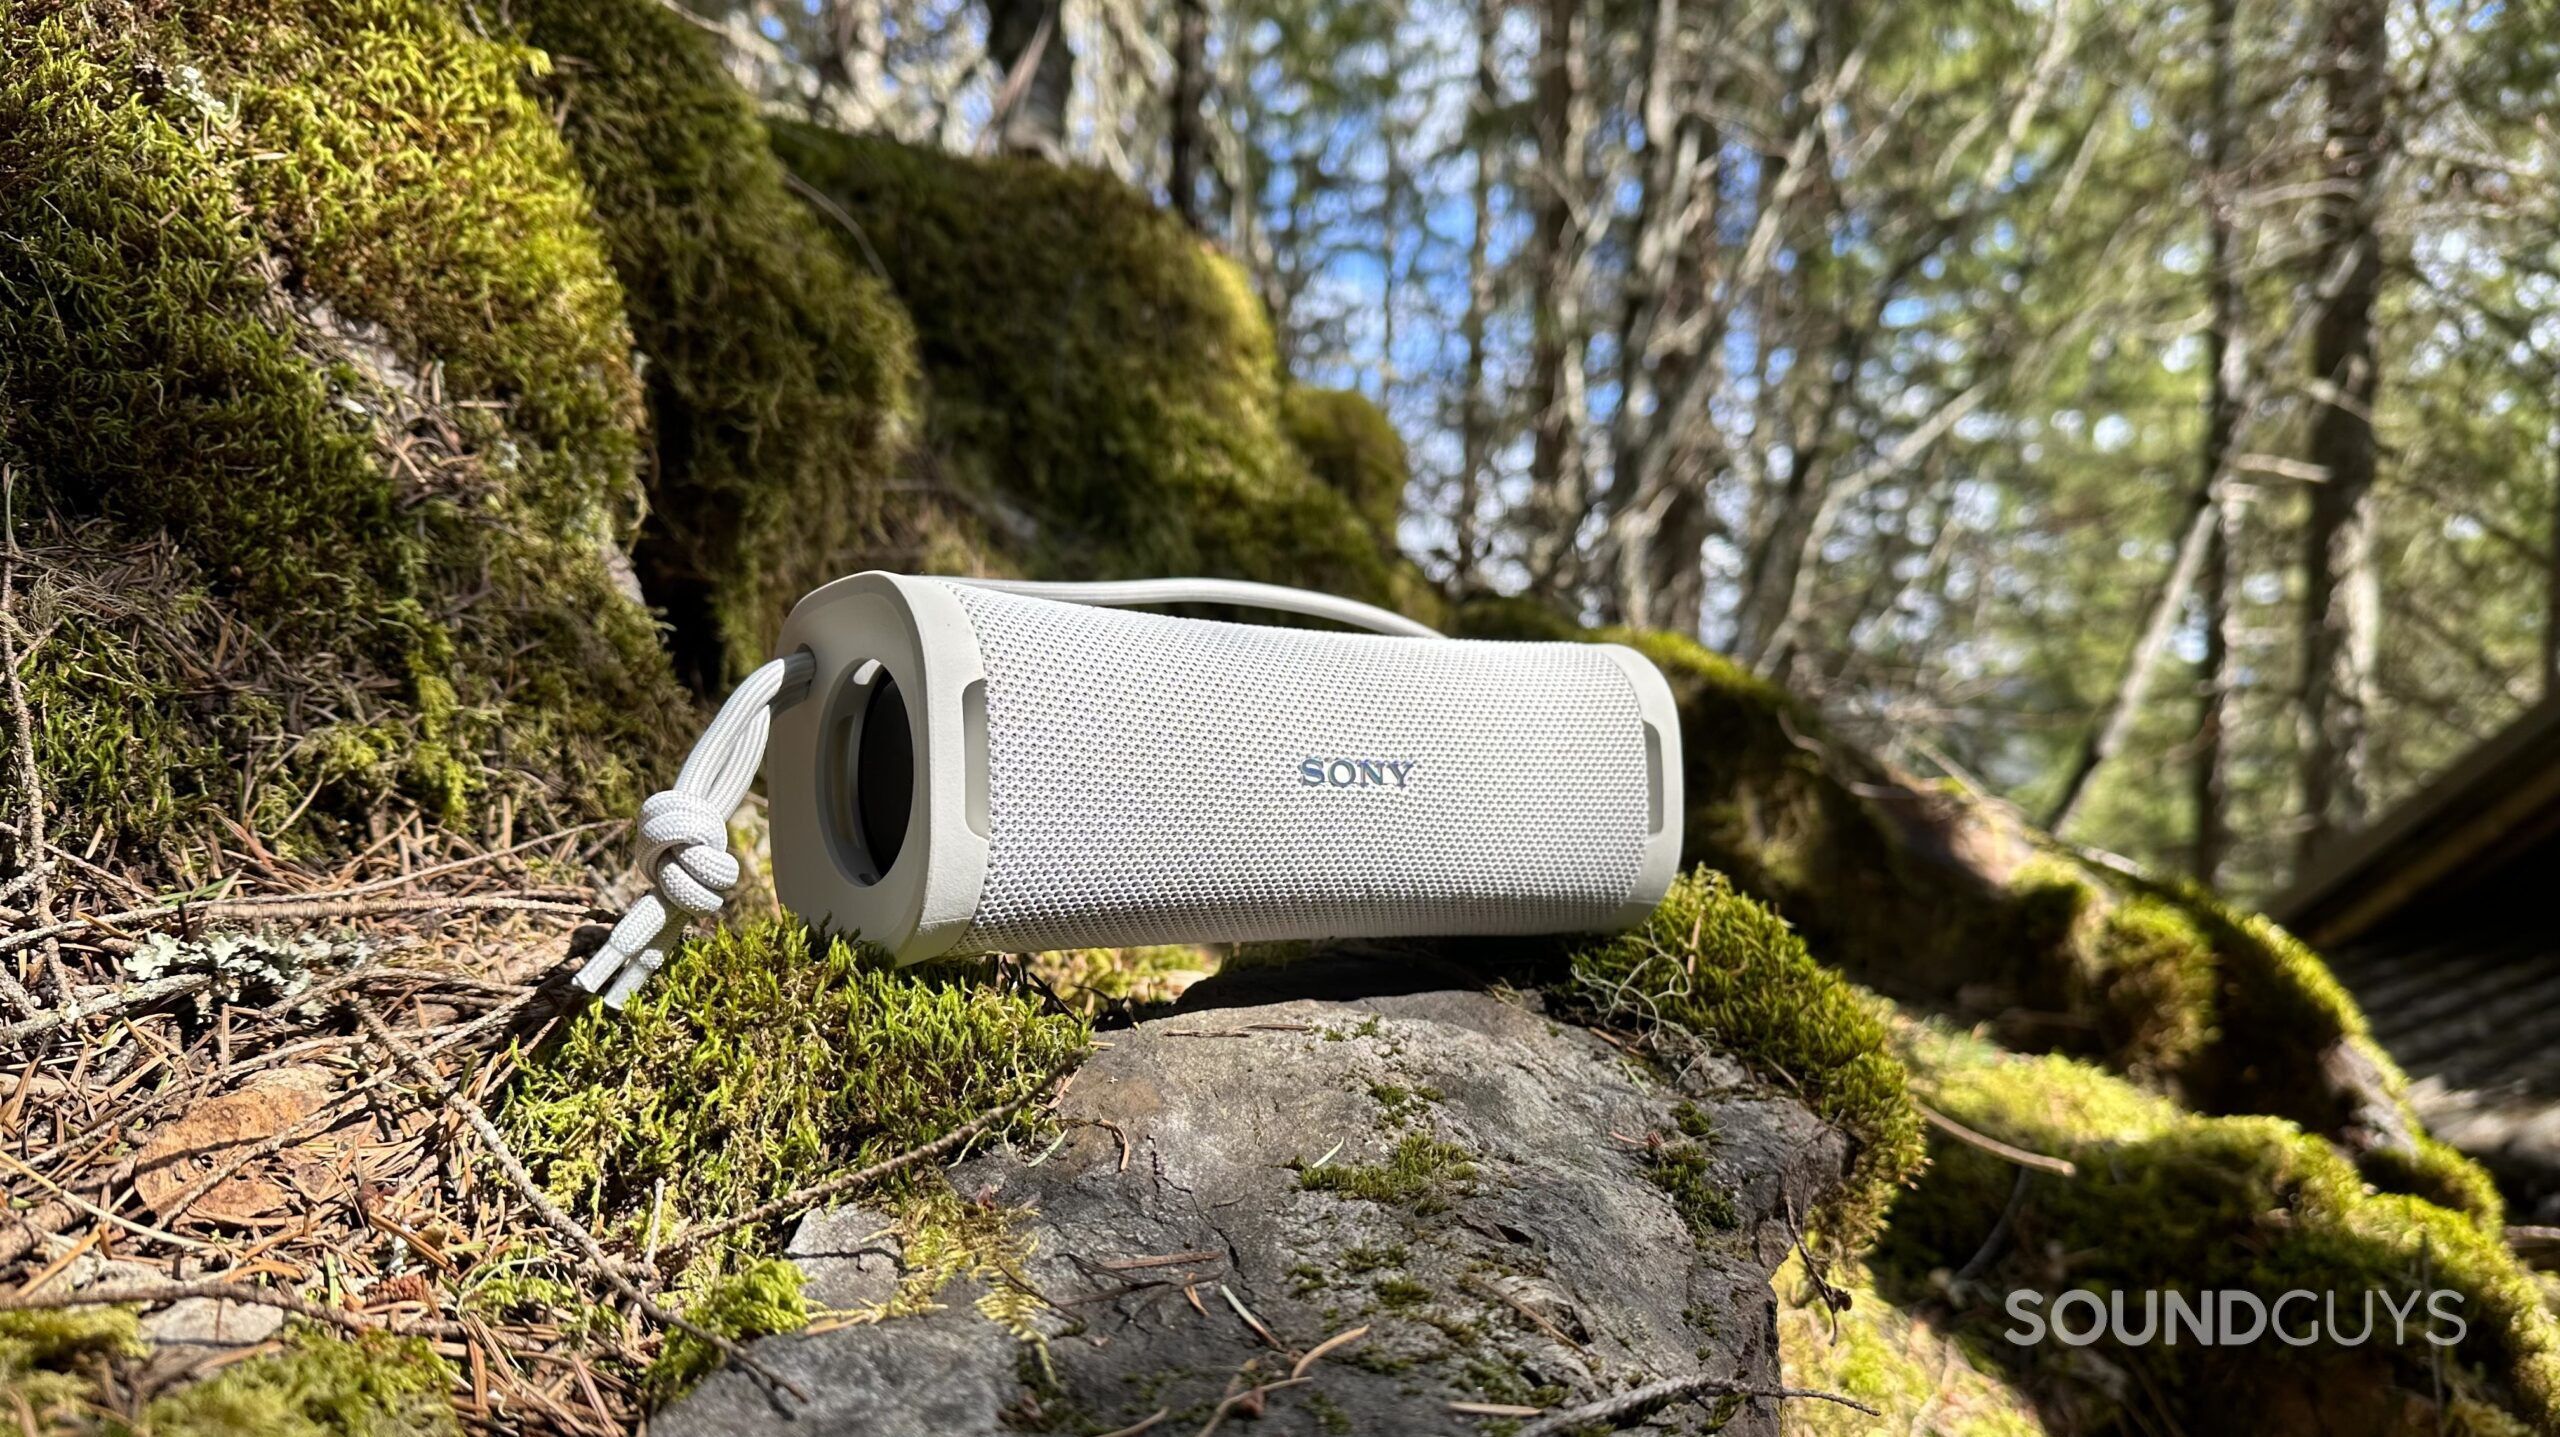 A Sony ULT Field 1 speaker placed on a mossy rock in the outdoors